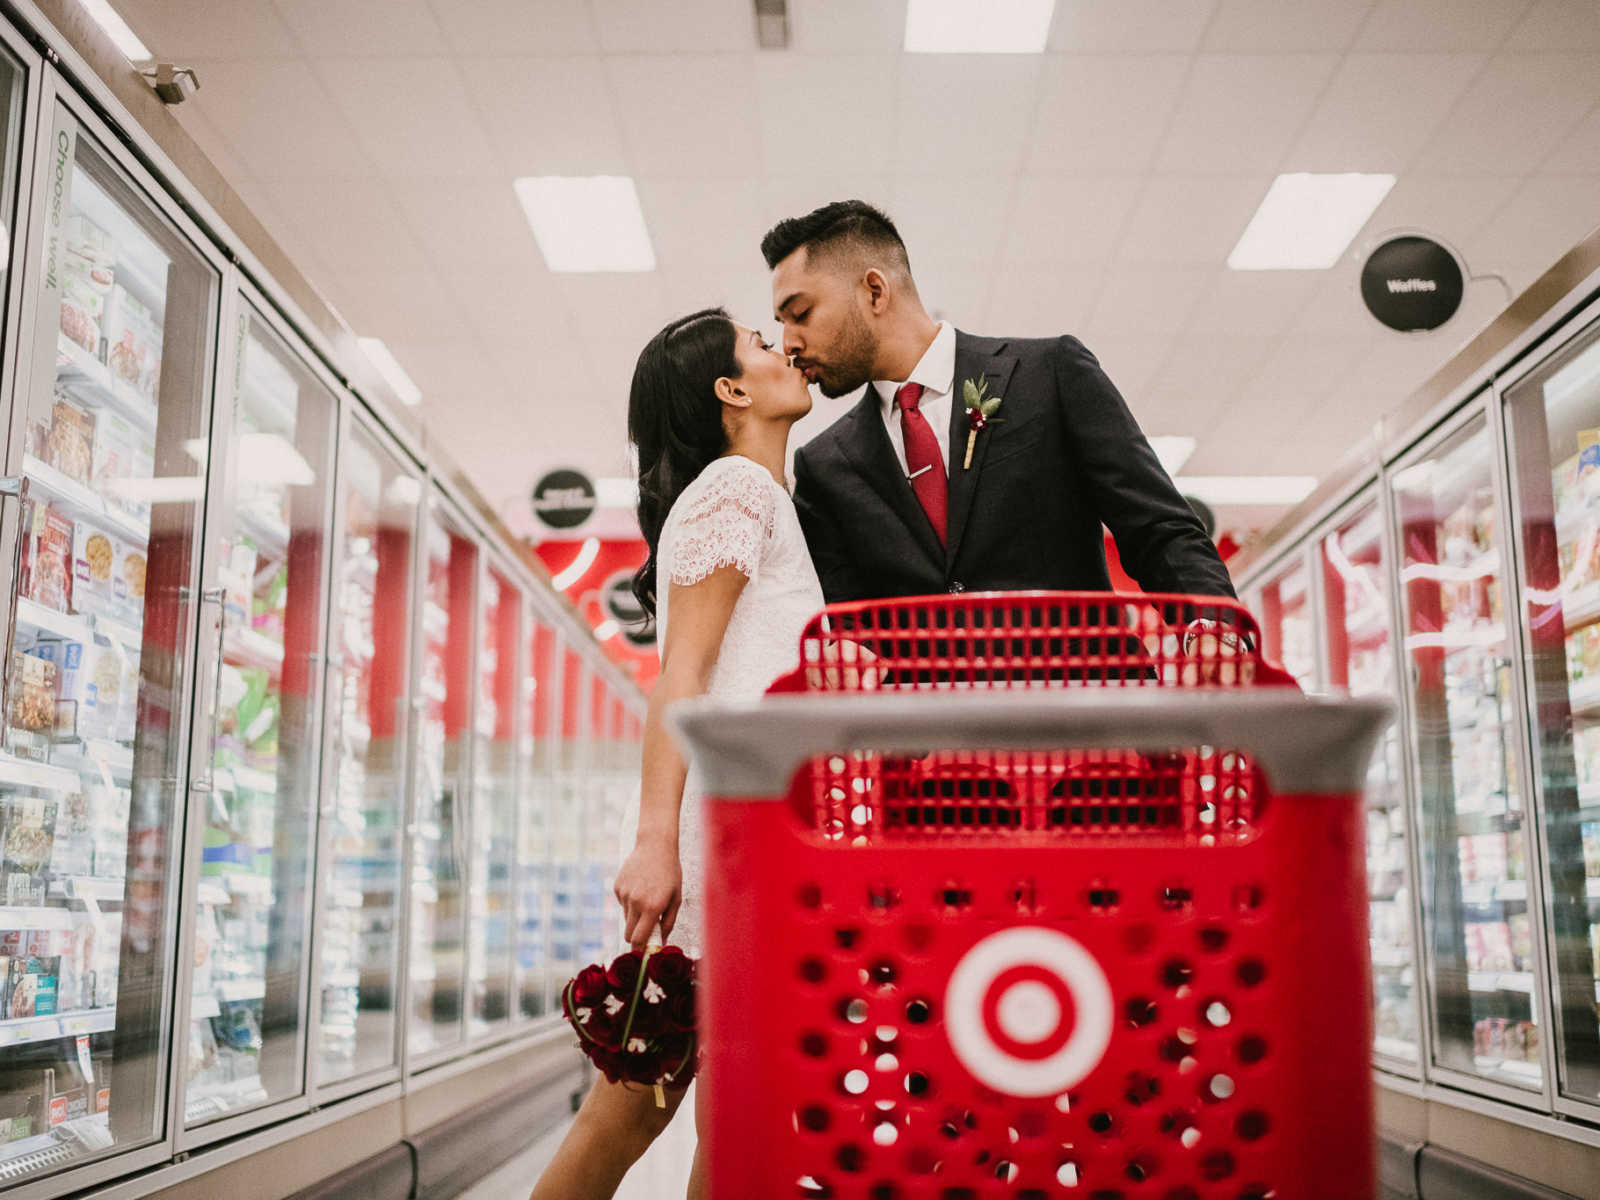 Bride and groom kiss in freezer aisle of Target while groom holds on to shopping cart